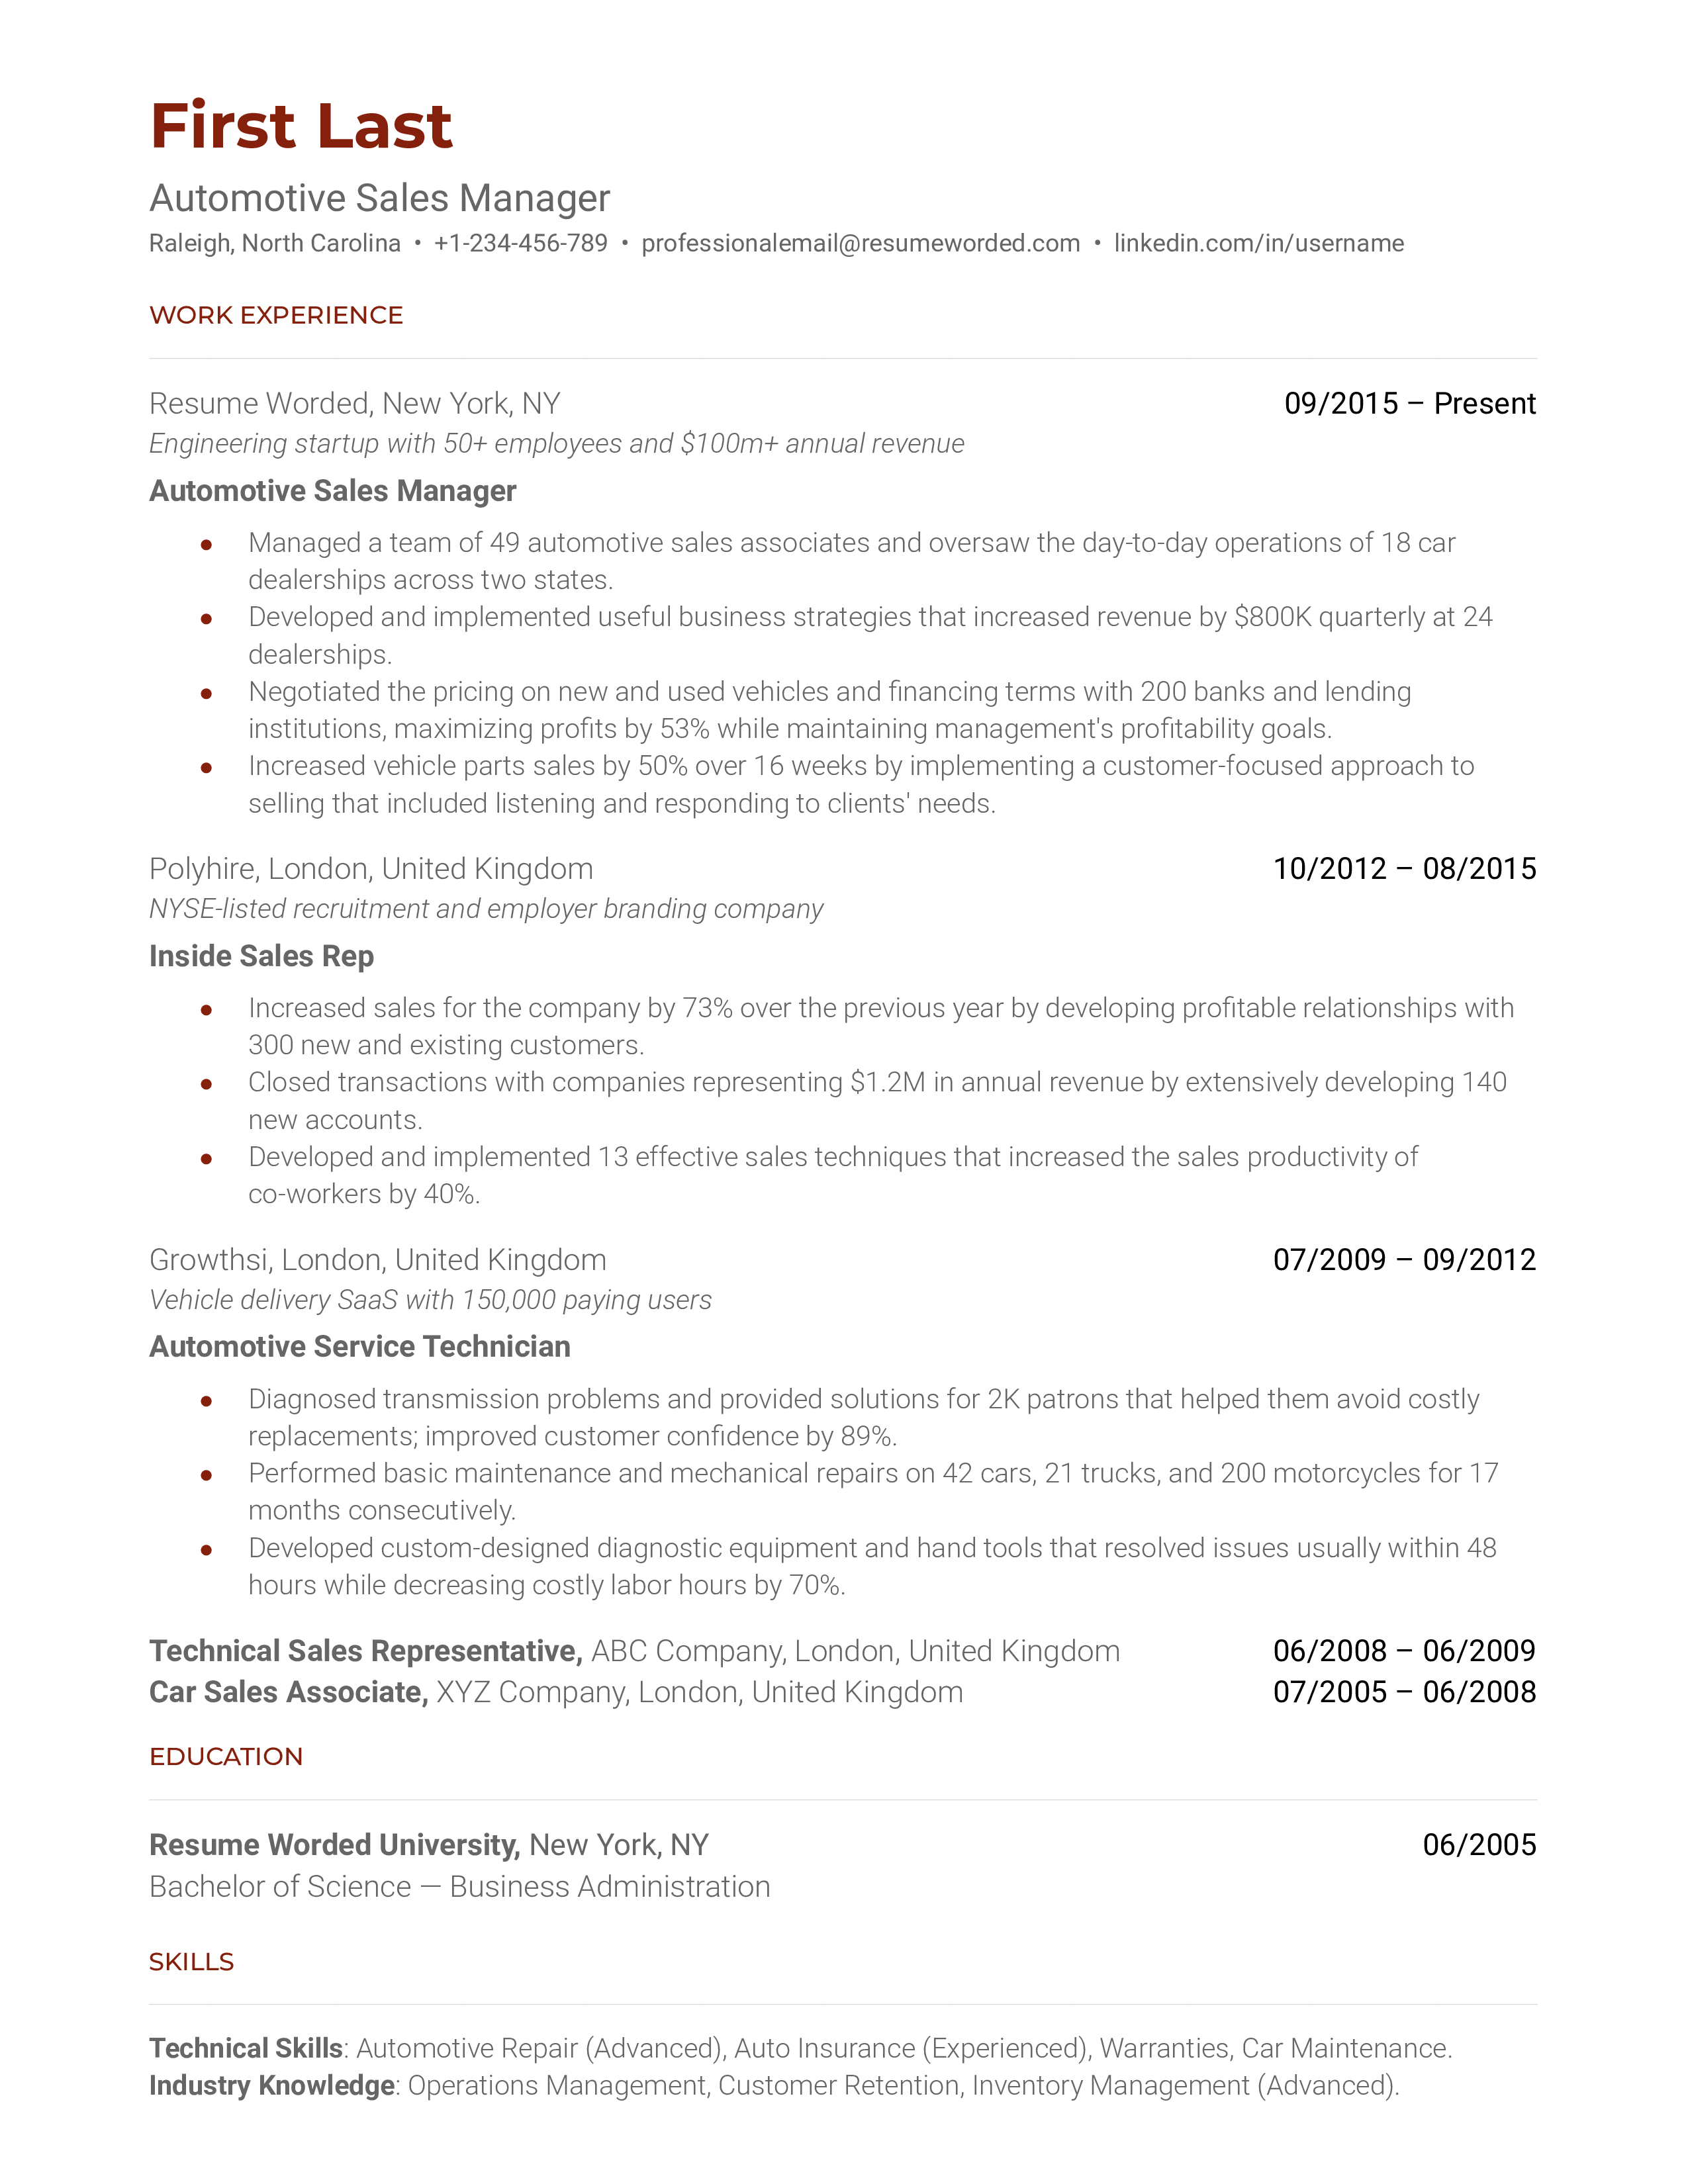 A well-structured CV for an Automotive Sales Manager position.